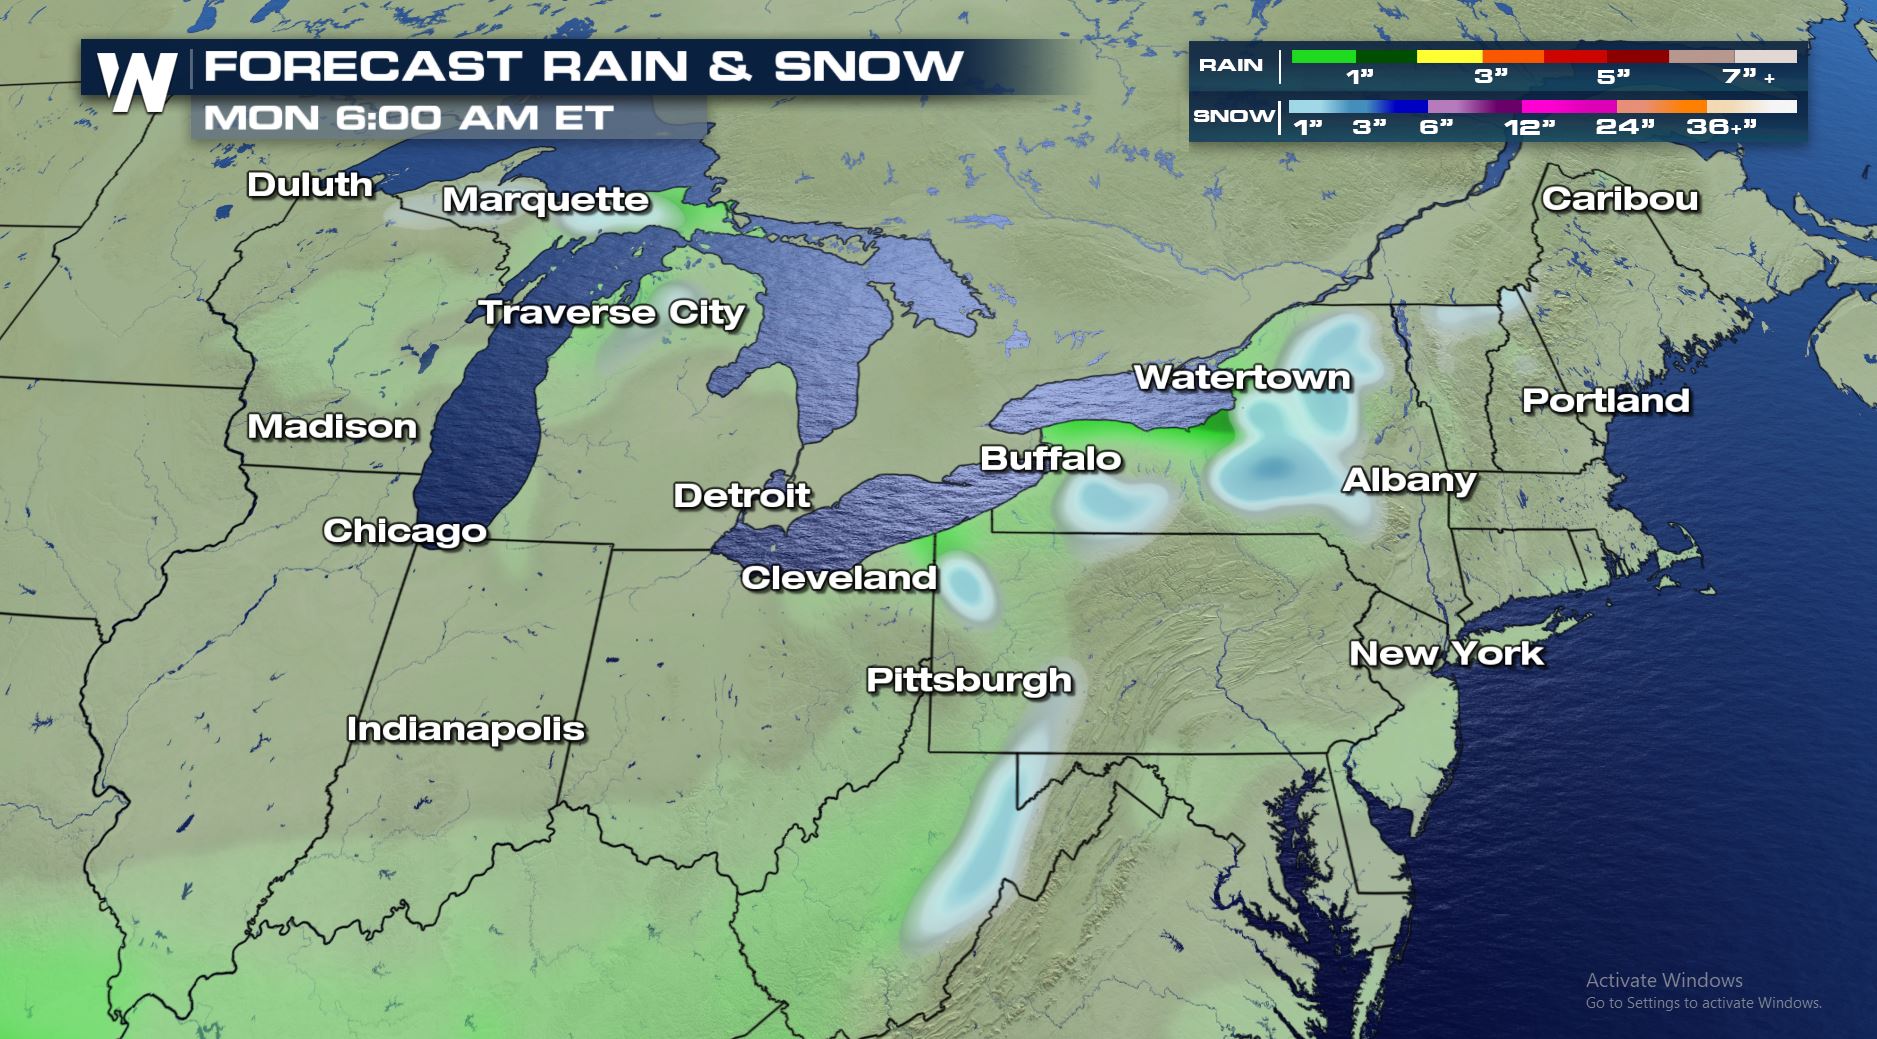 Light Lake-Effect Snow for Northeast, Great Lakes